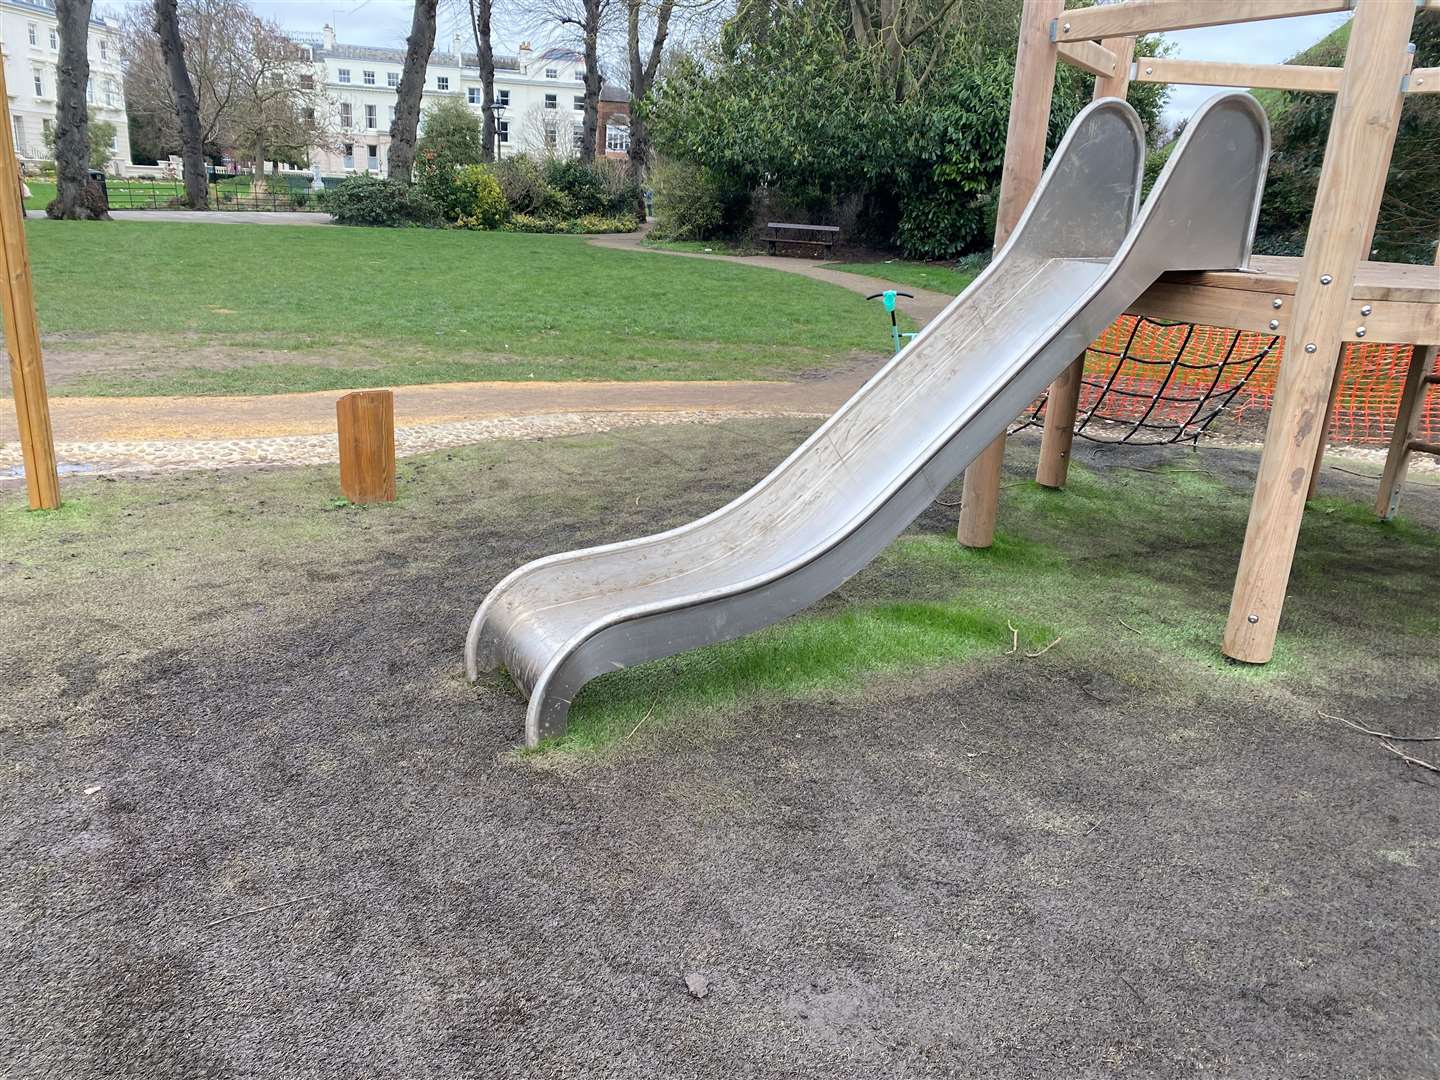 Parents visiting the park with their children have complained about mud seeping out of the turf and covering the slide and other play equipment